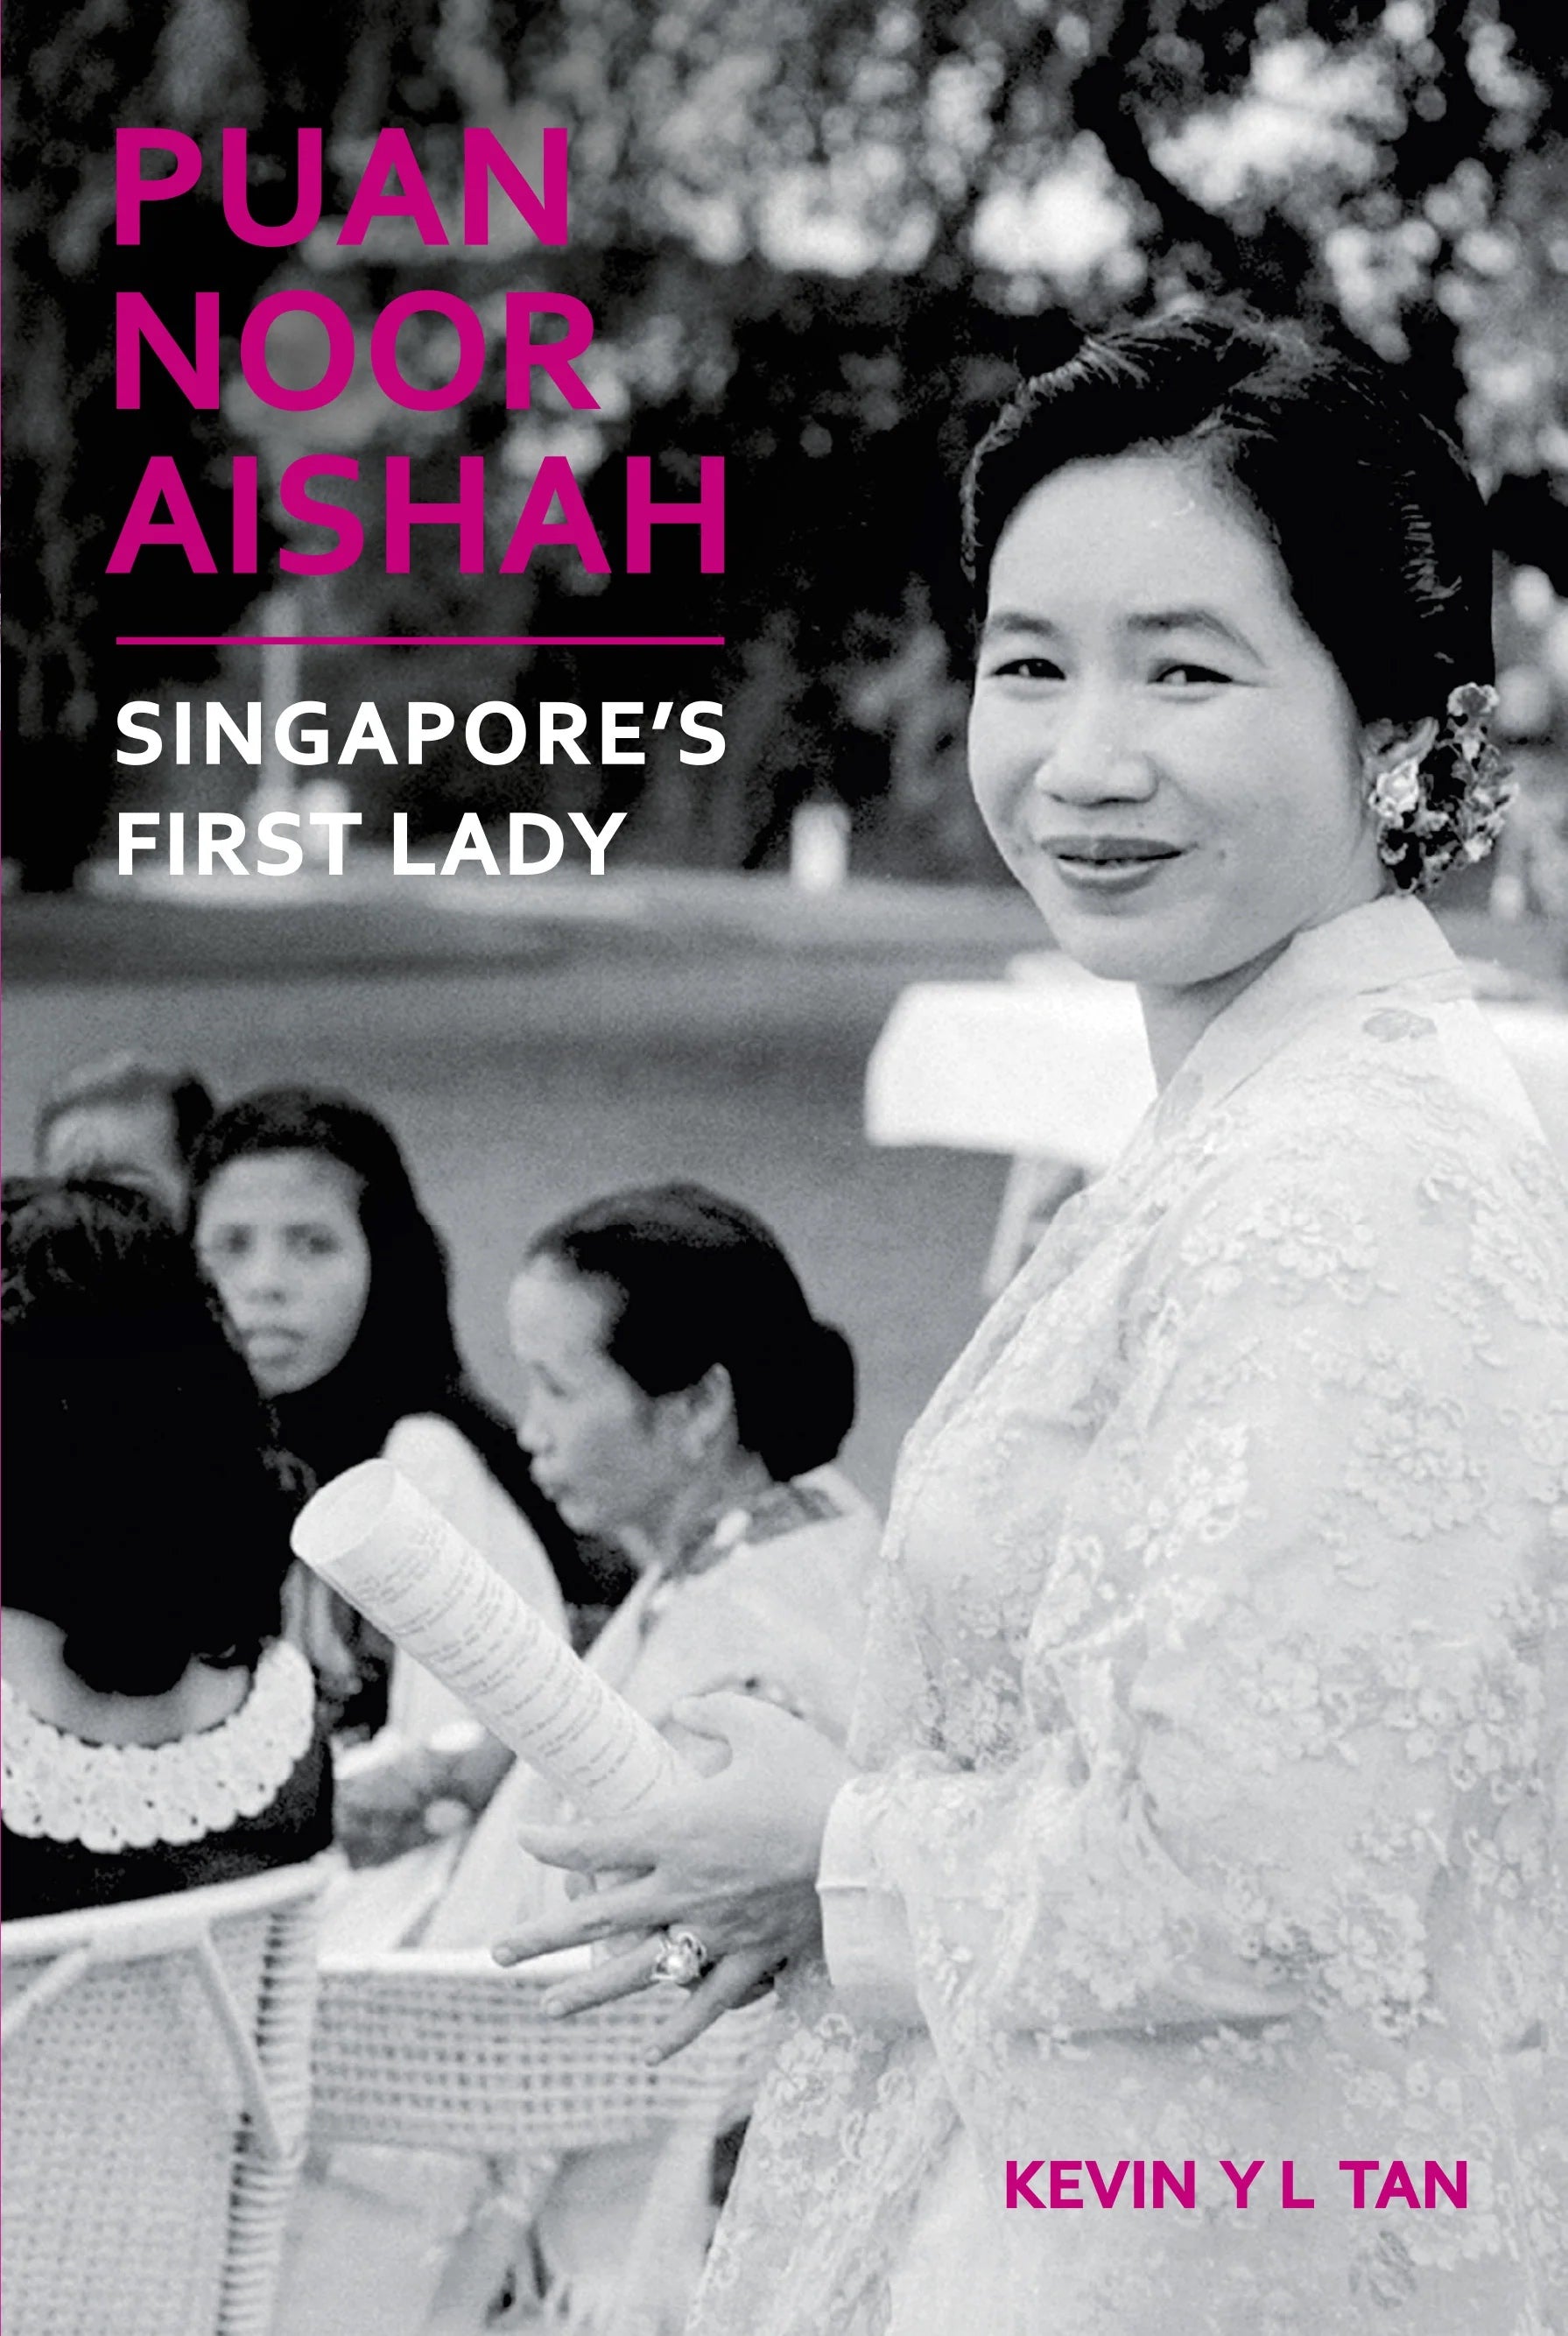 Puan Noor Aishah: Singapore's First Lady